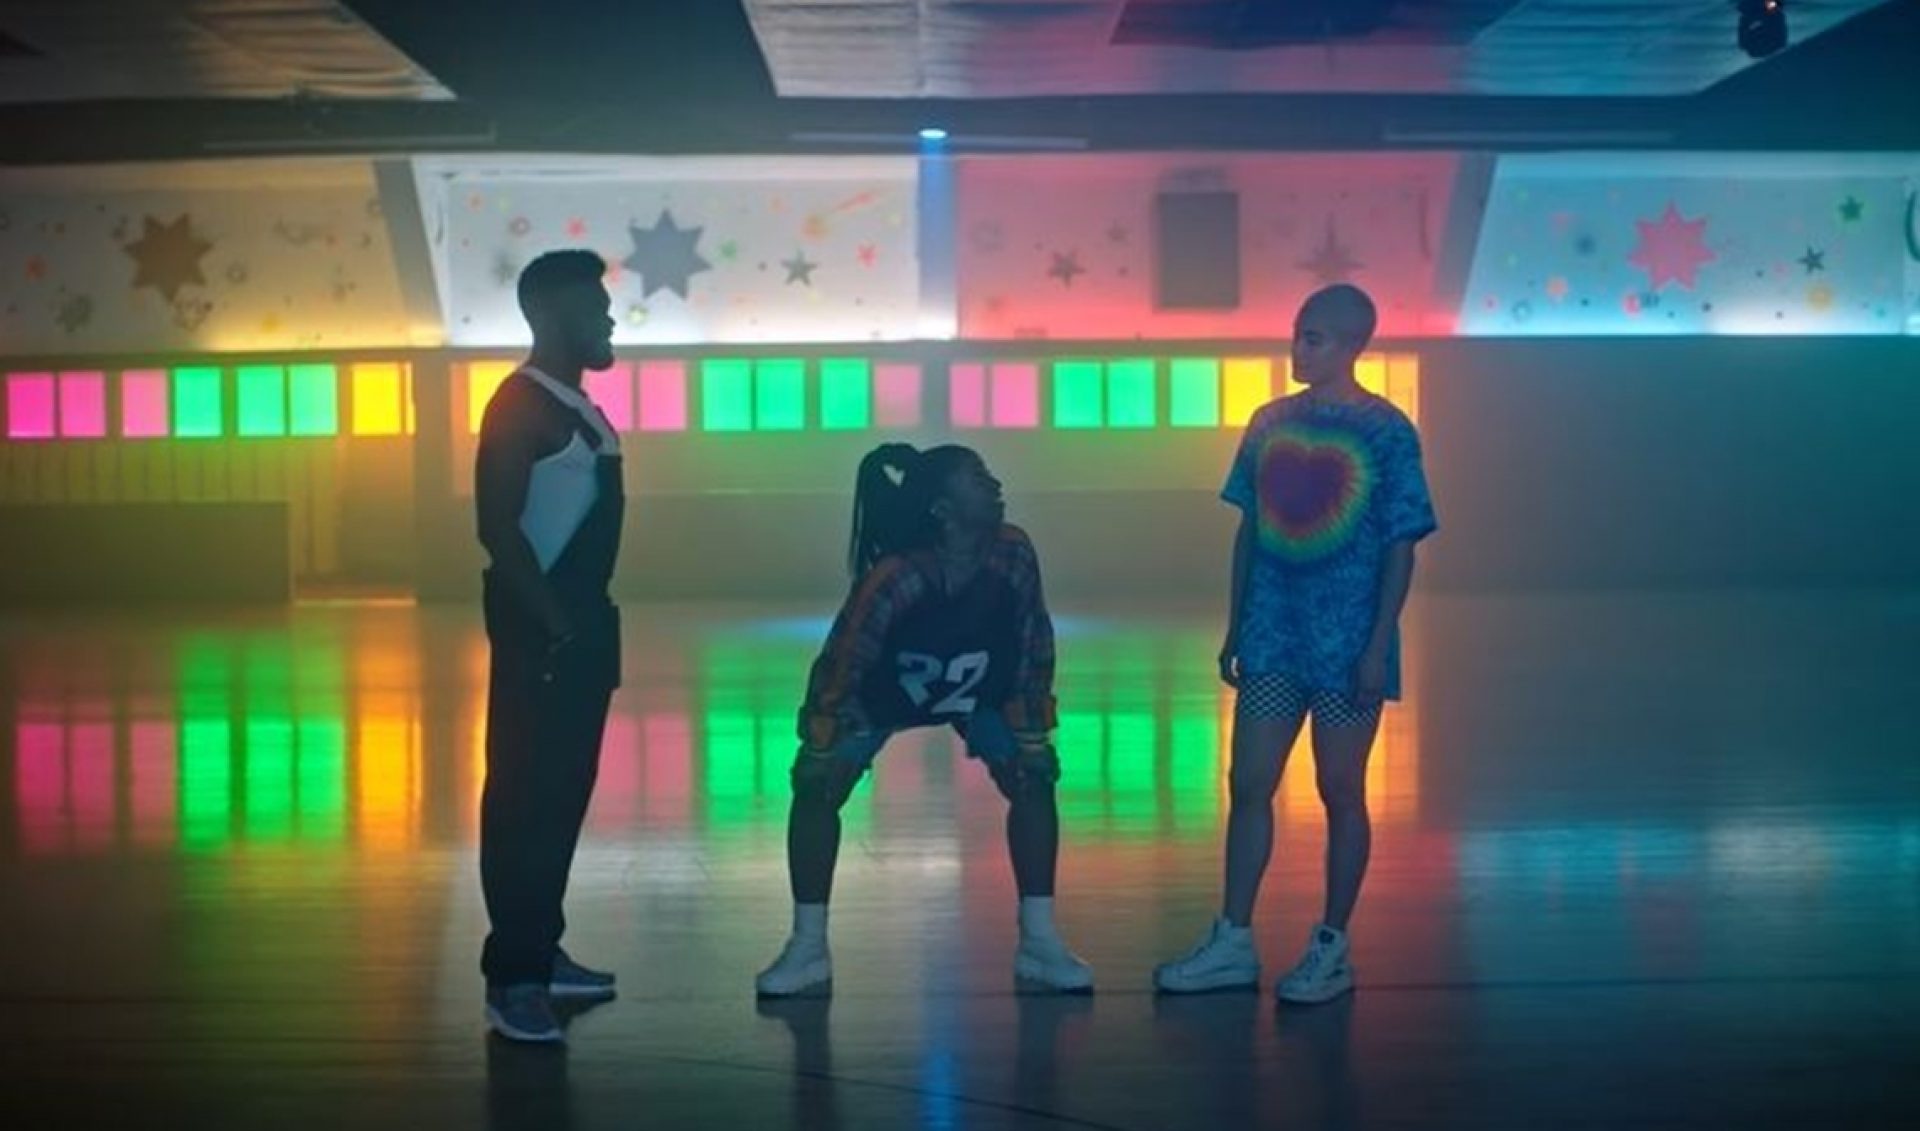 Viacom’s Branded Agency Teams With Beats On ‘Lit!’ Series About Viral Dance Culture